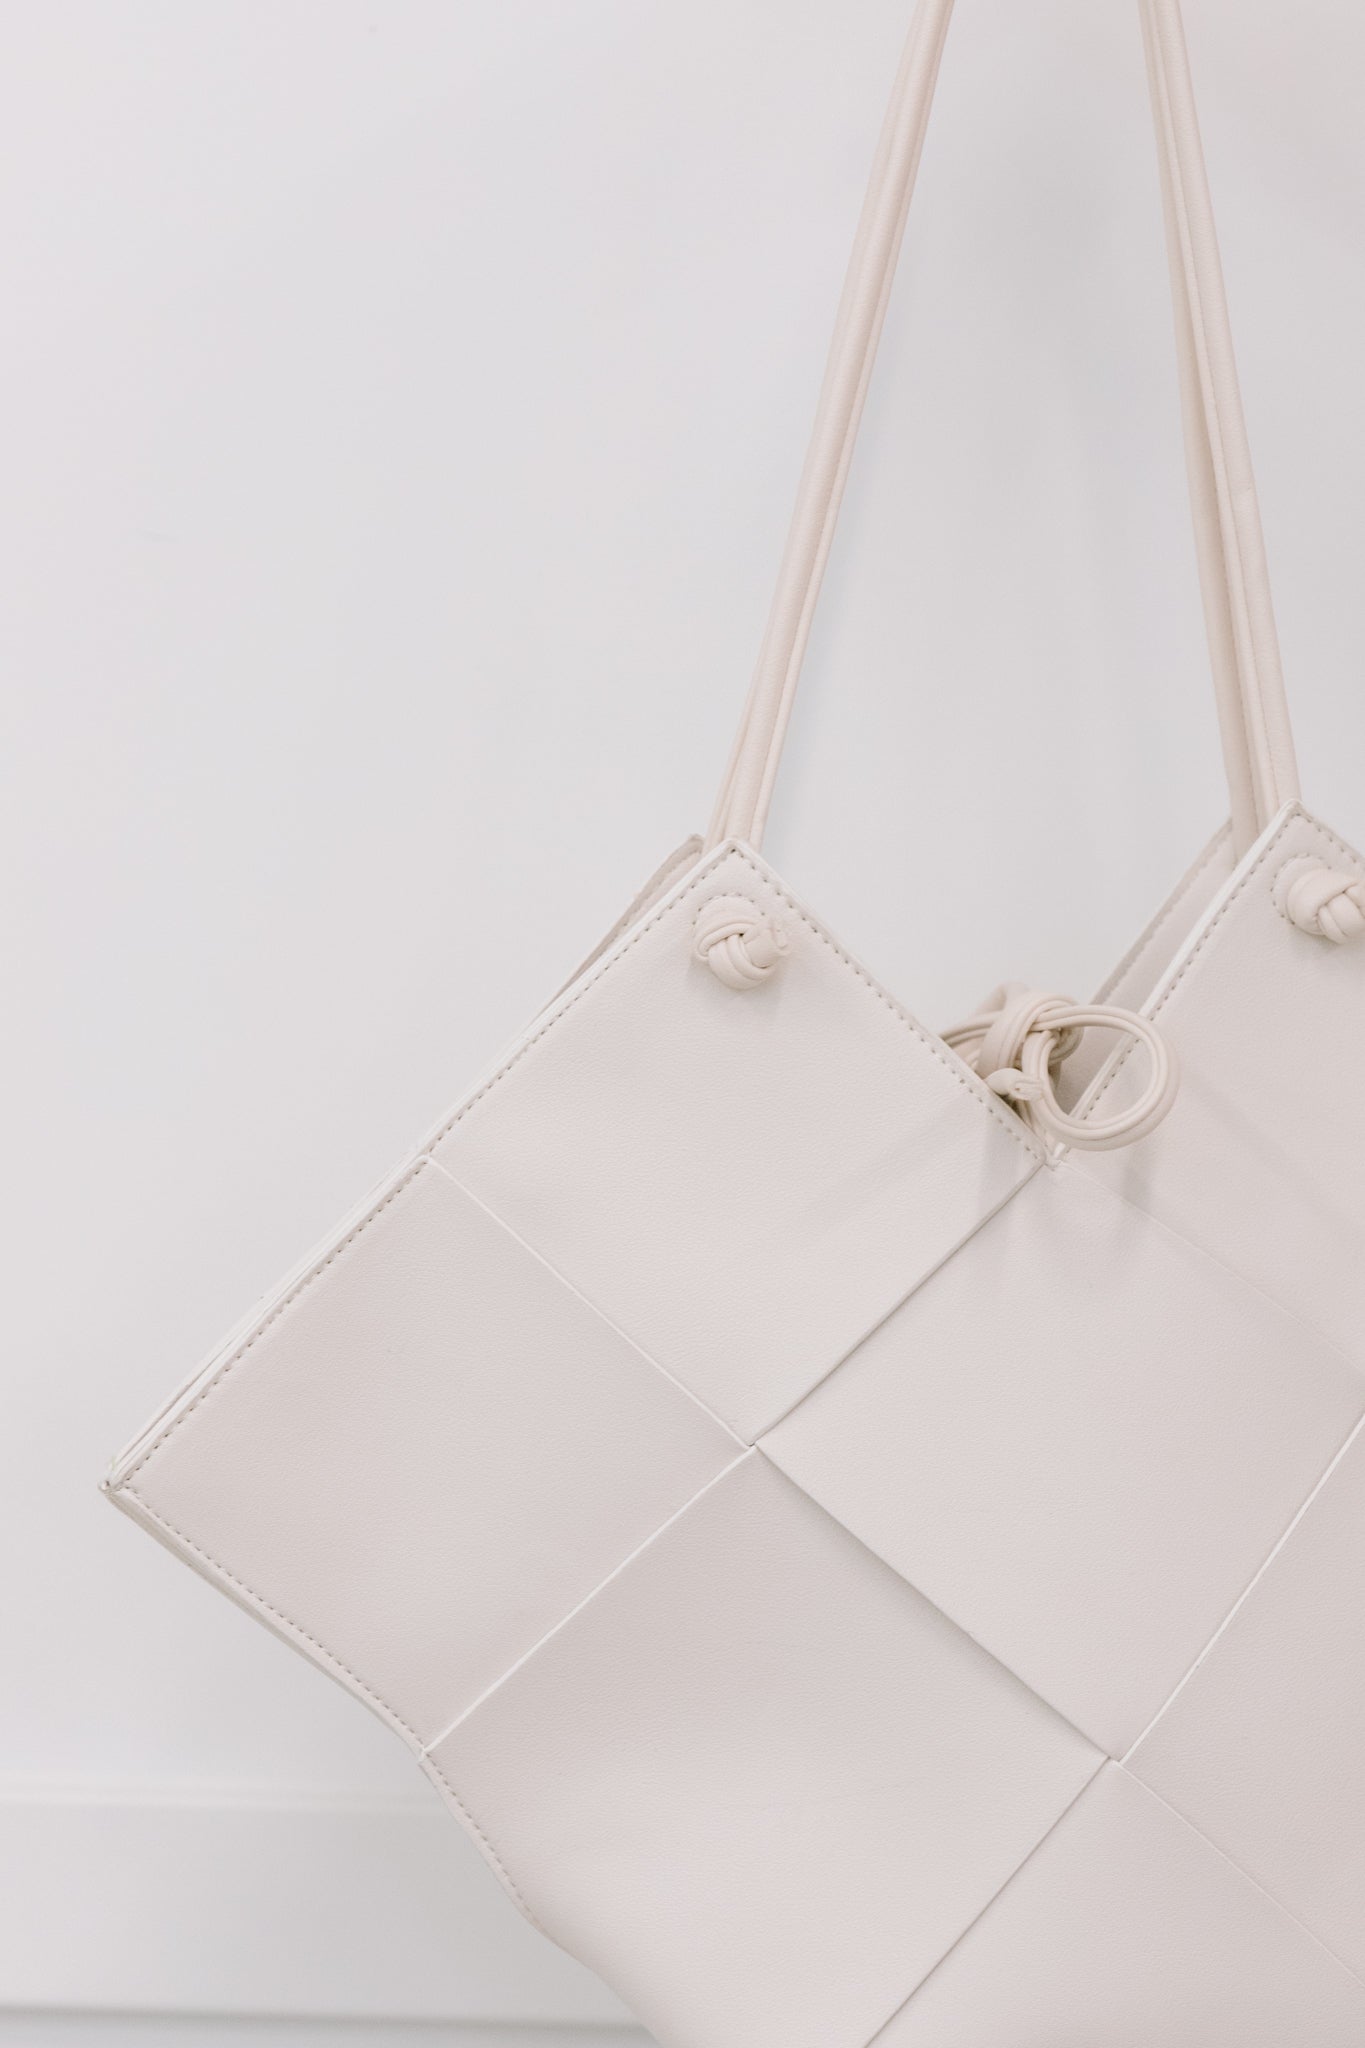 Woven Tote in White Ave Shops